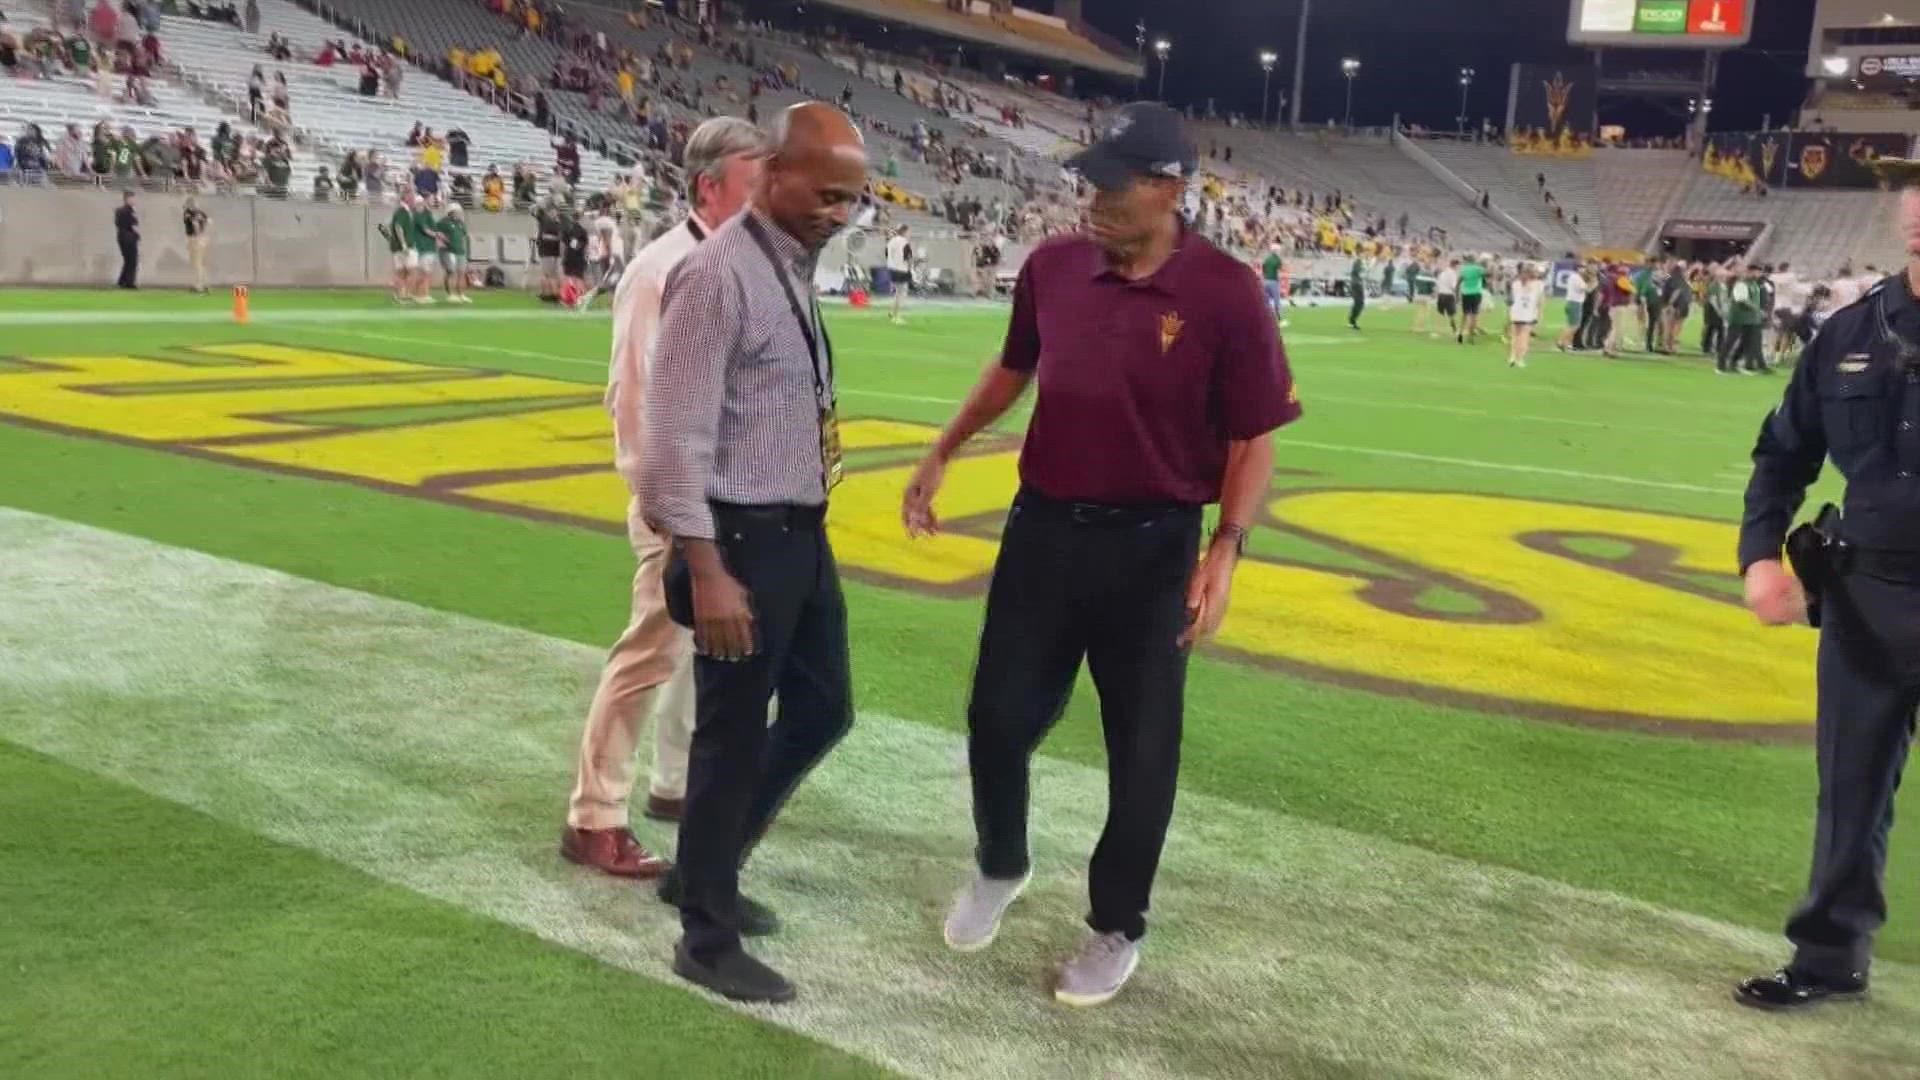 ASU's recently ousted coach may get a $ million buyout 